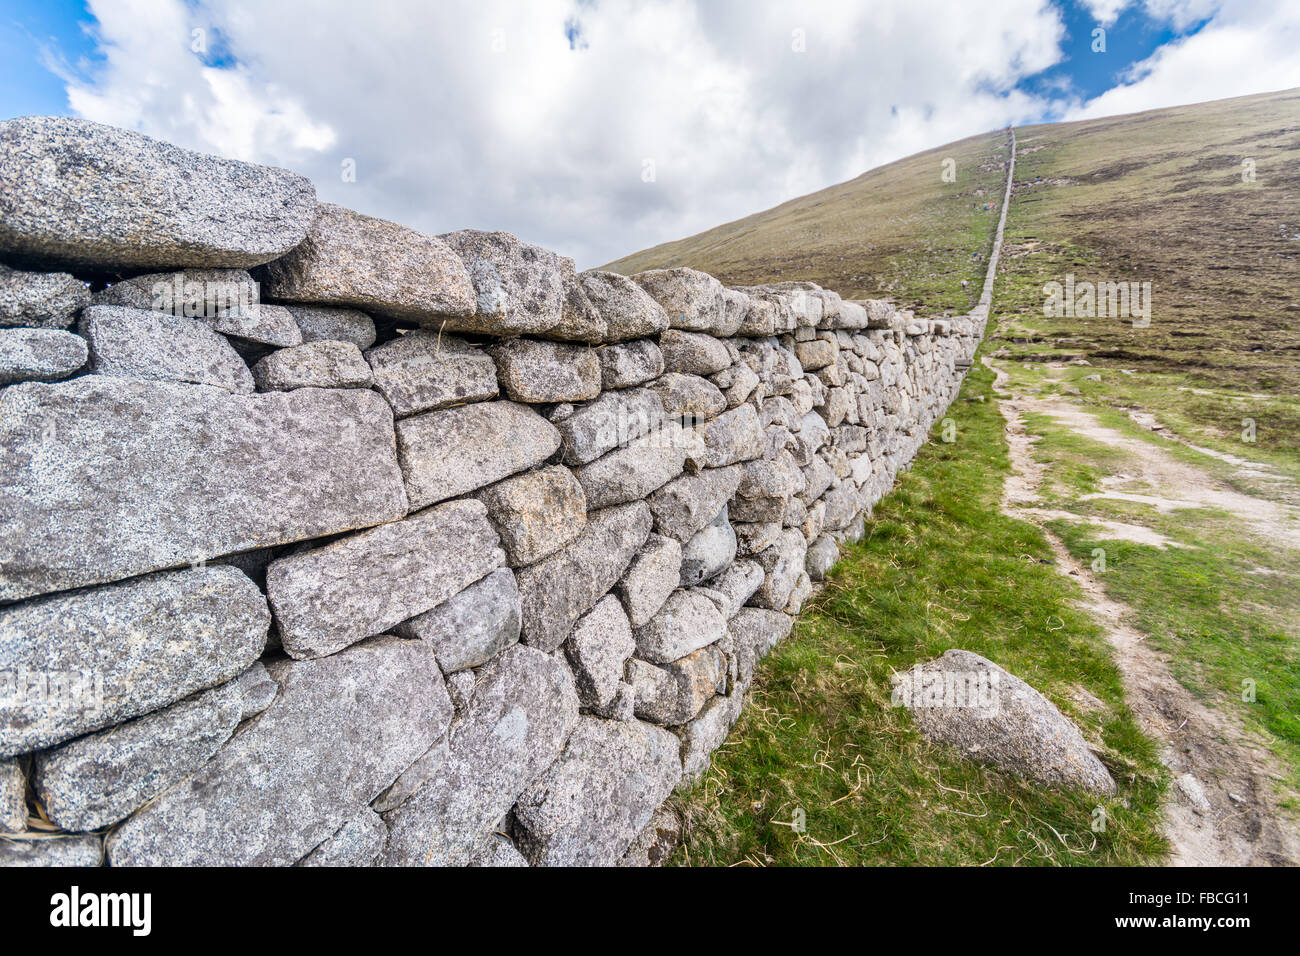 The Mourne Mountains wall running up Slieve Donard near Newcastle in County Down, Ireland Stock Photo